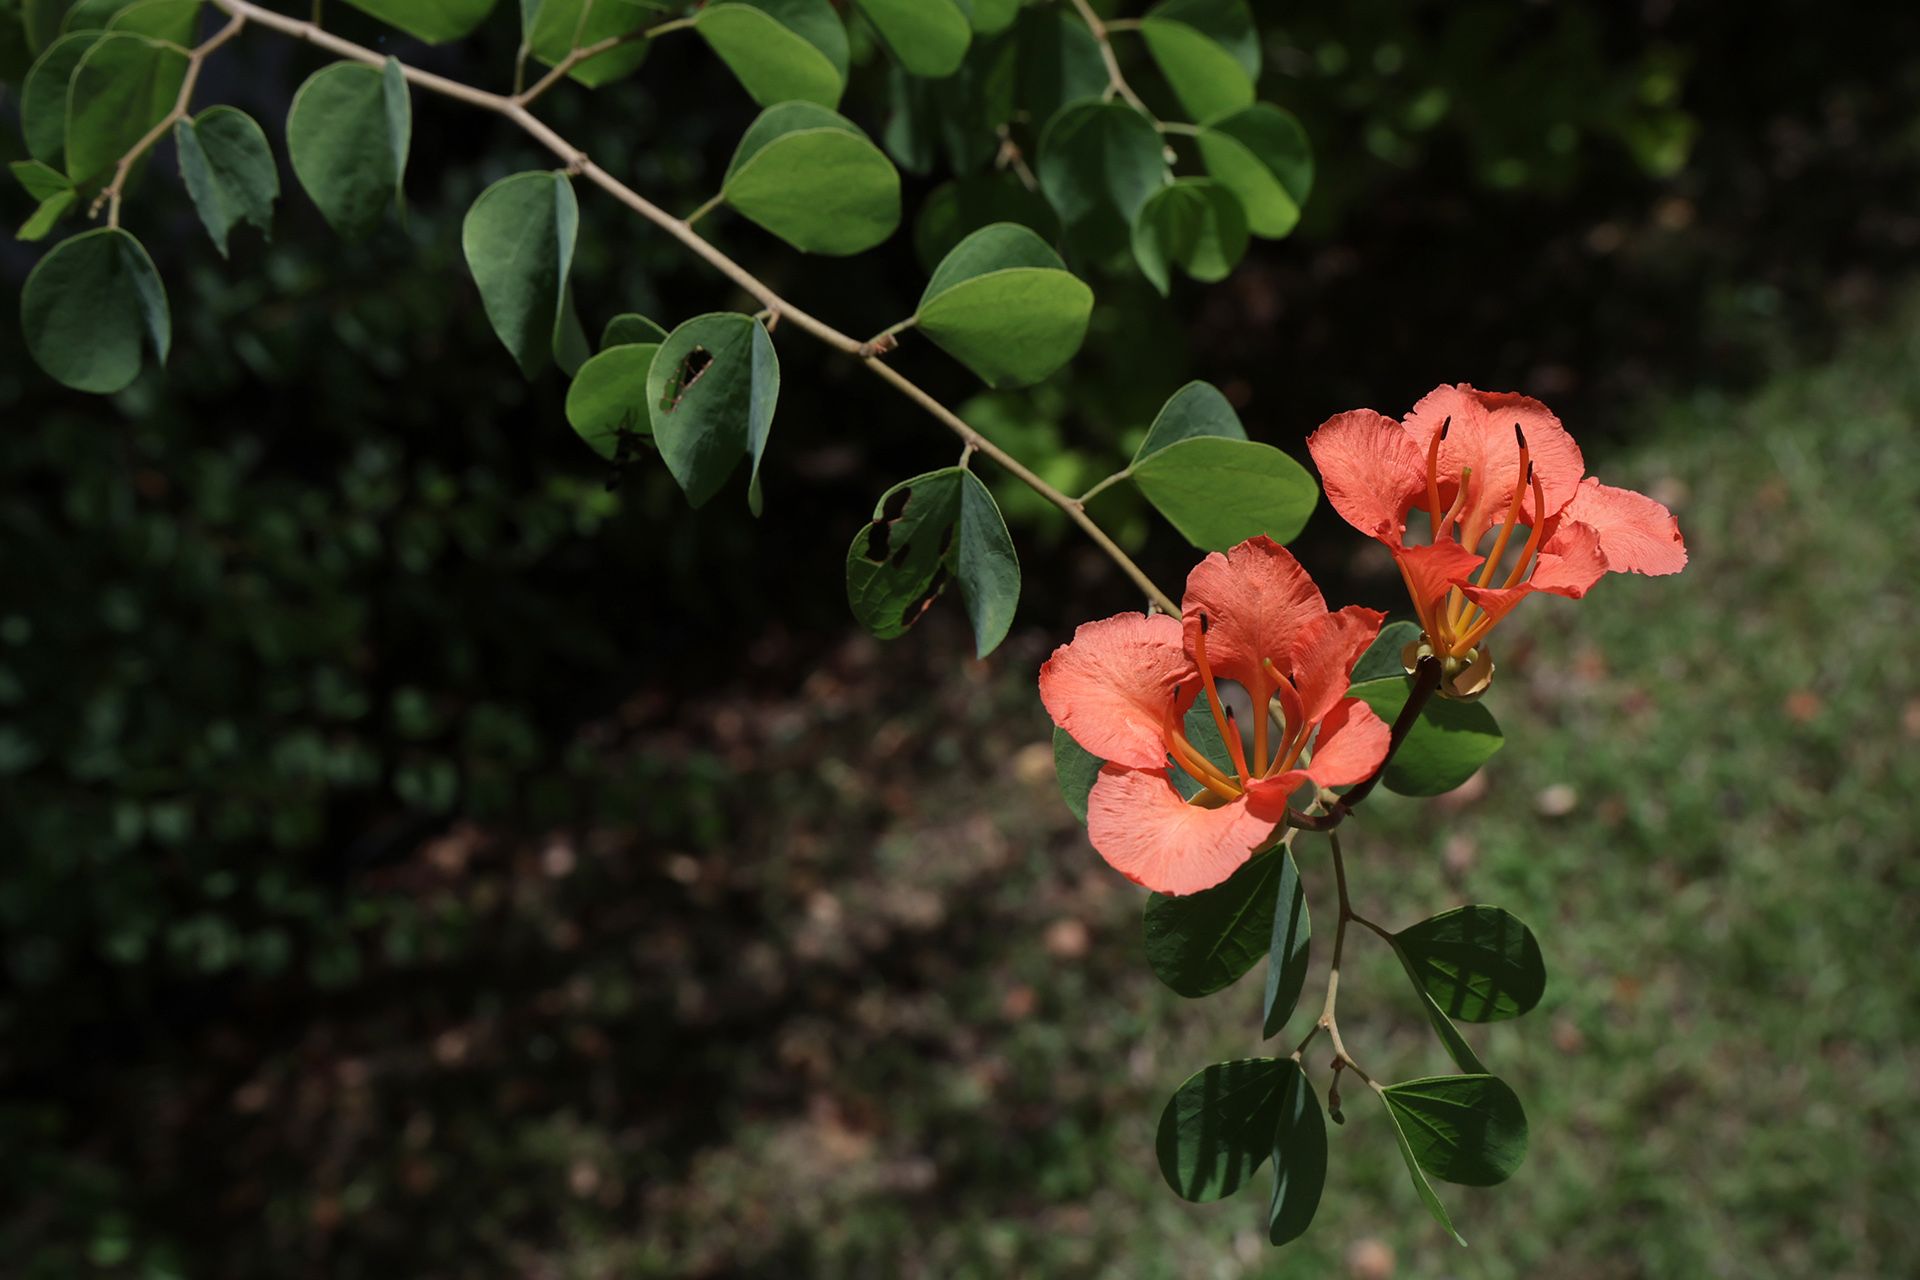 Also known as the red butterfly tree, this climbing shrub’s leaves resemble a butterfly in shape. ST PHOTO: NEO XIAOBIN